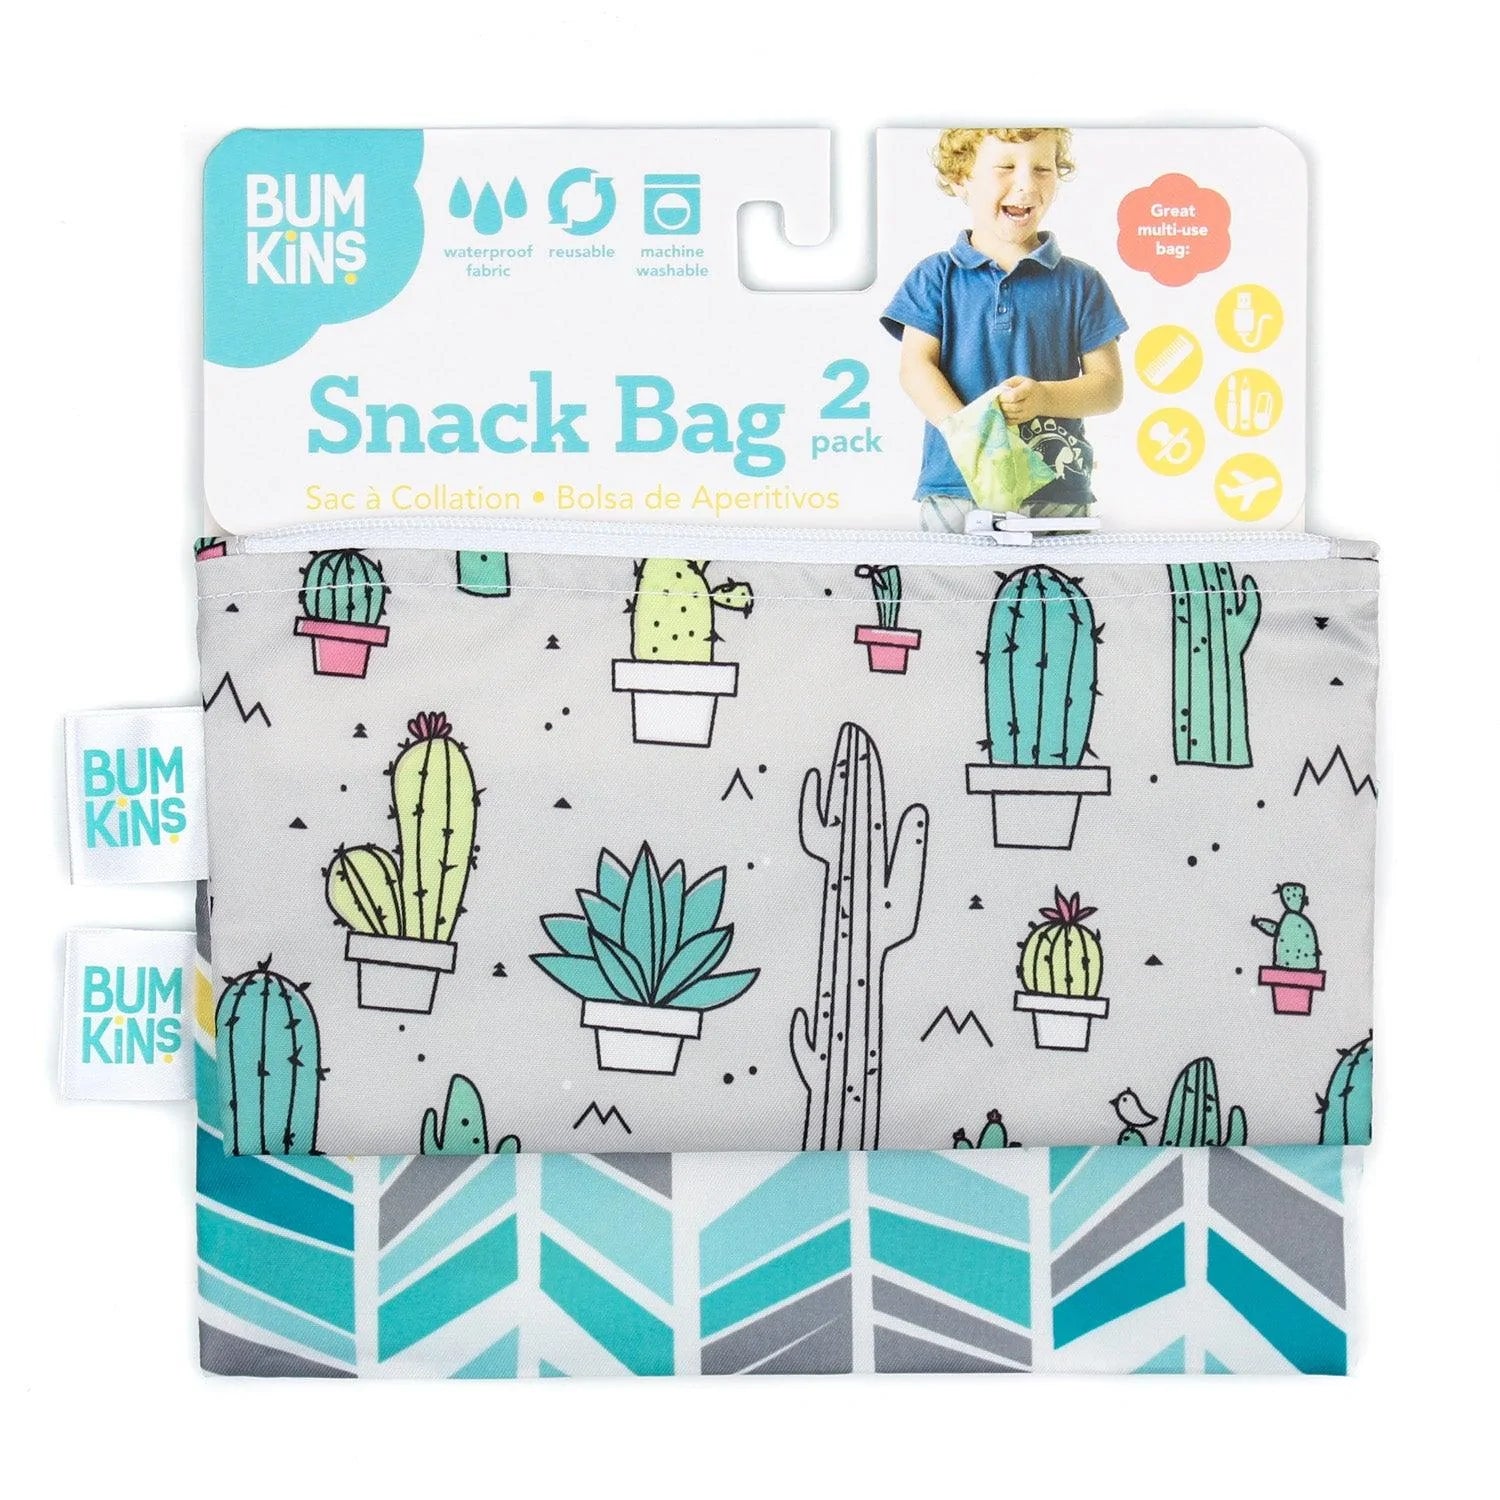 Reusable Snack Bag, Small 2-Pack: Quill & Cacti - Bumkins